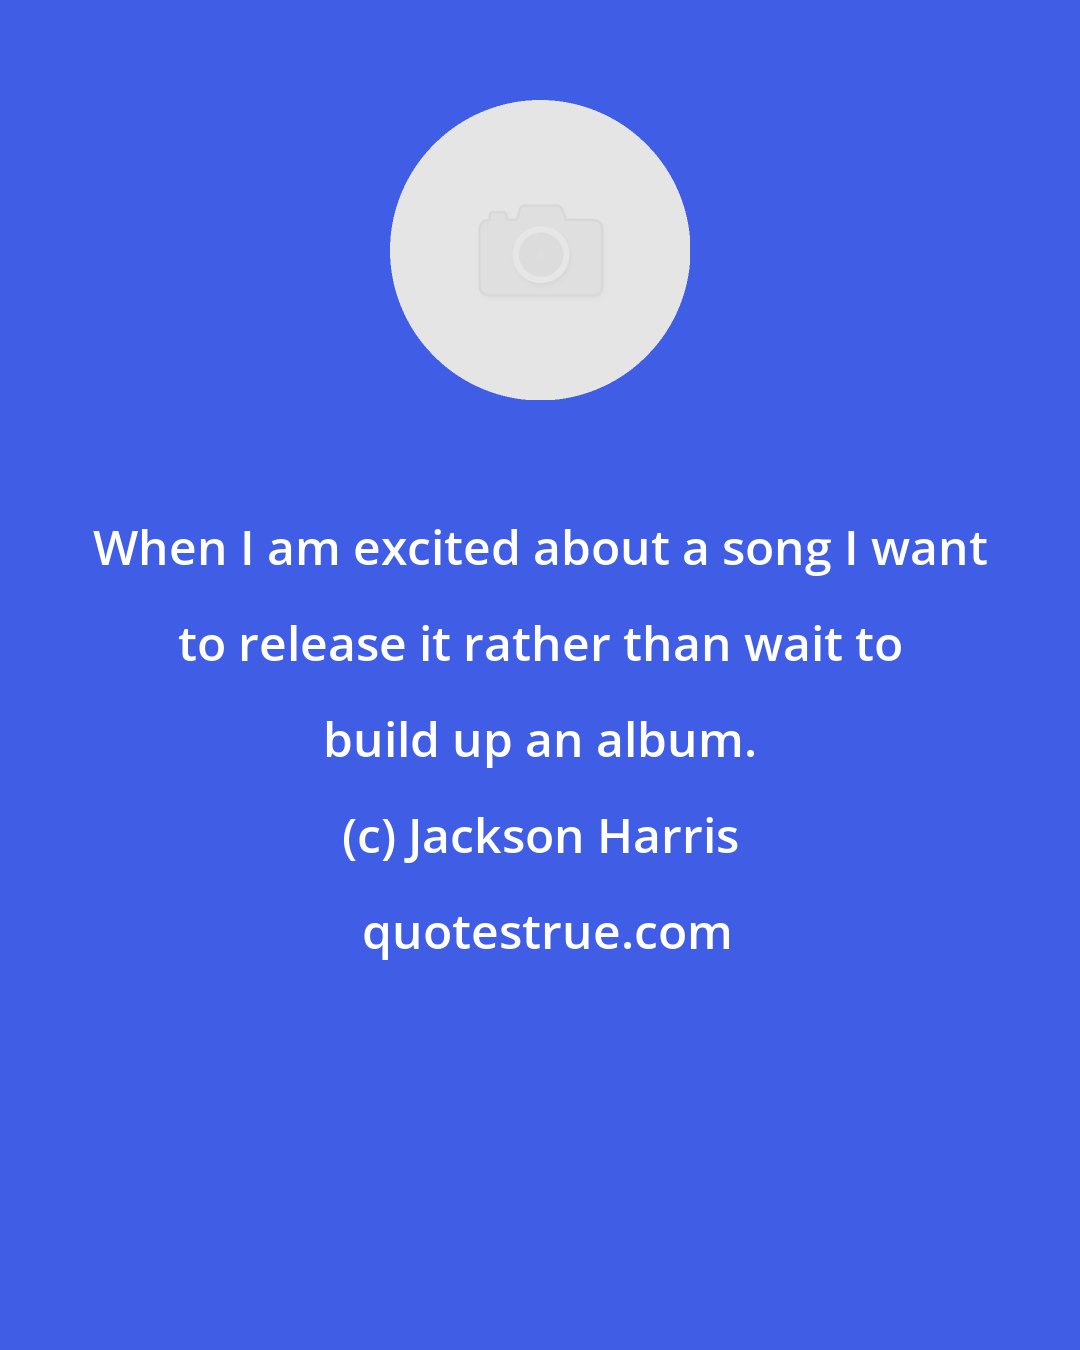 Jackson Harris: When I am excited about a song I want to release it rather than wait to build up an album.